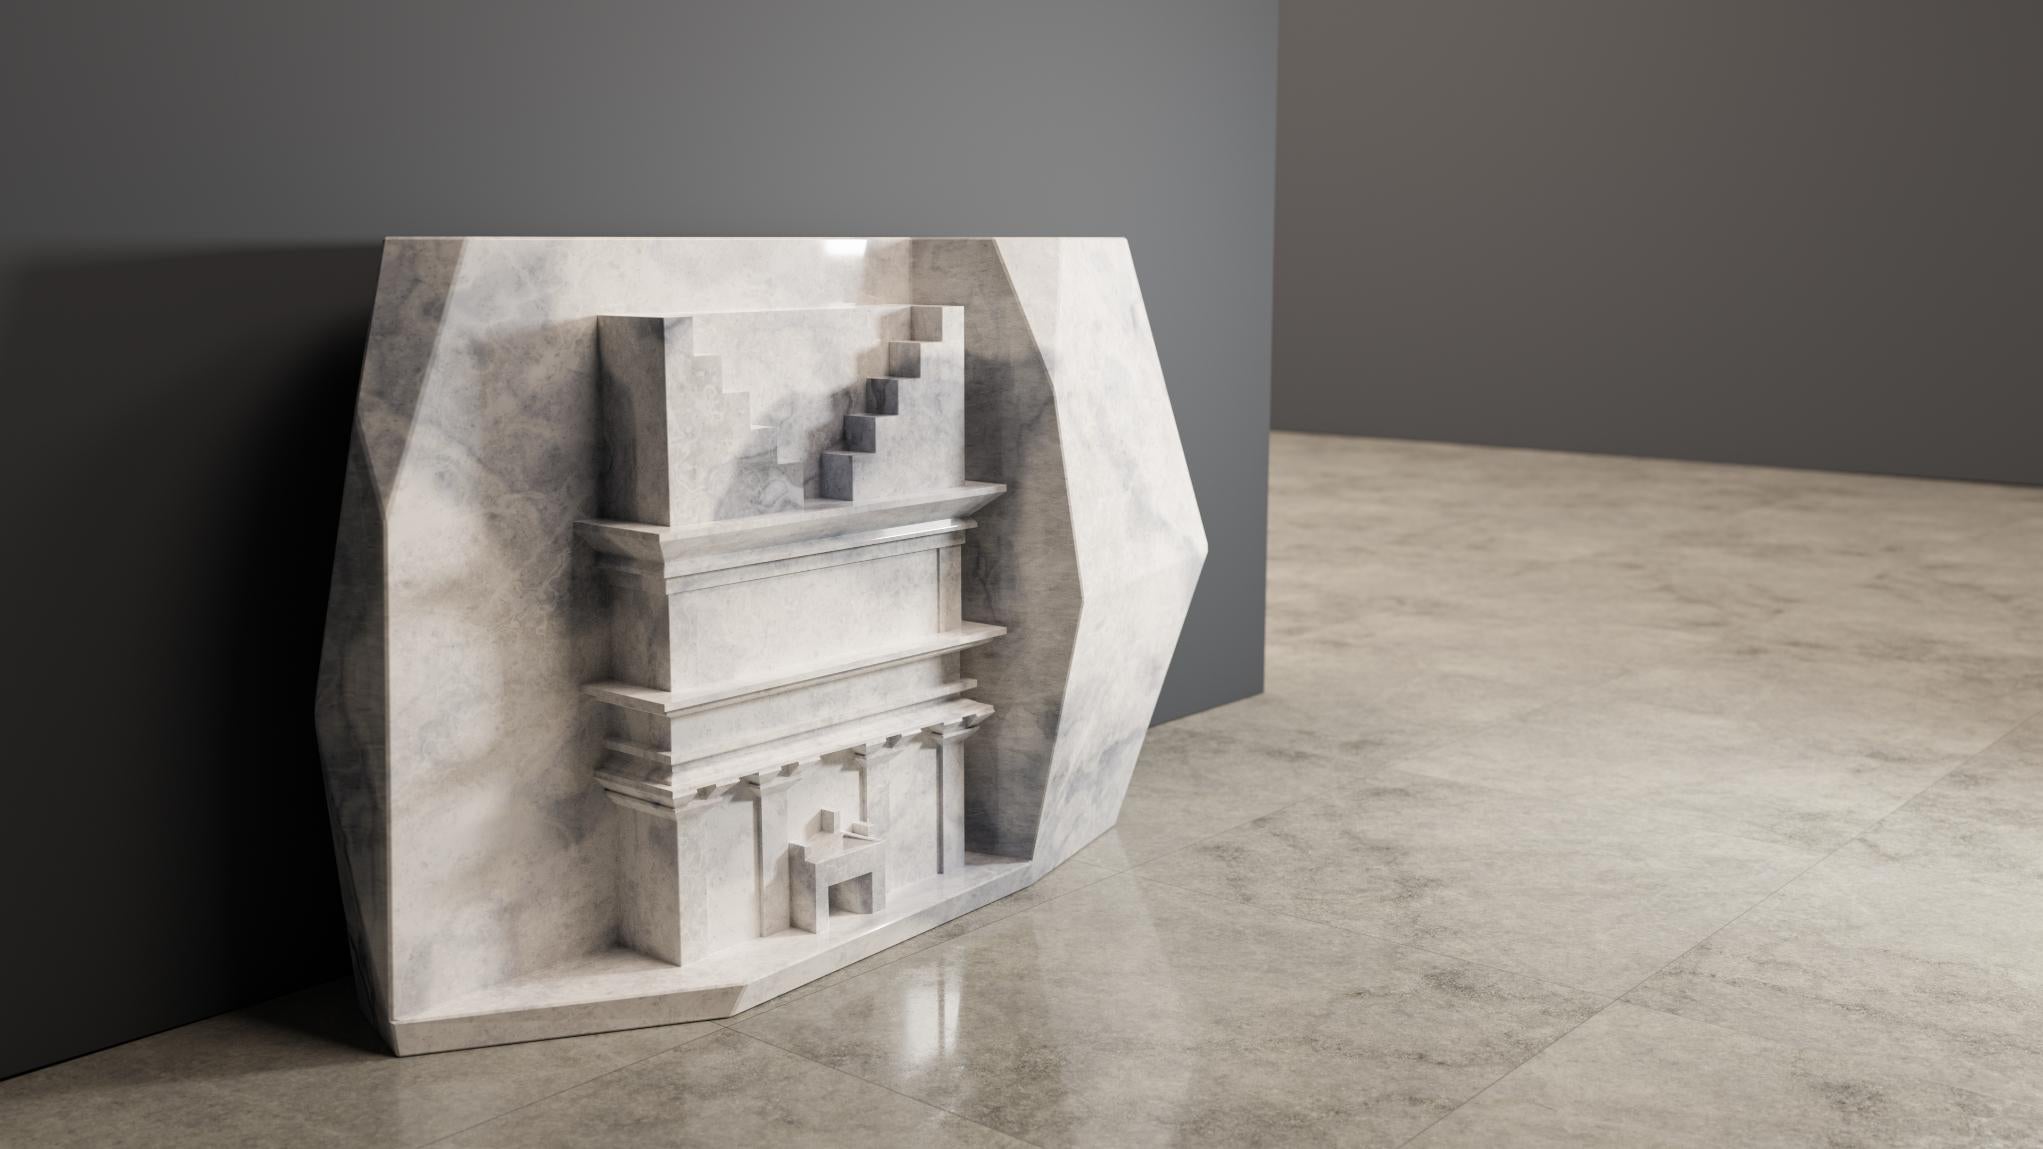 A unique, one-off edition piece of the AlUla Civilization furniture design from Duffy London, brought to life as a stunning console table in premium marble stone.

Every piece is made on request using a single block of hand-selected white Italian